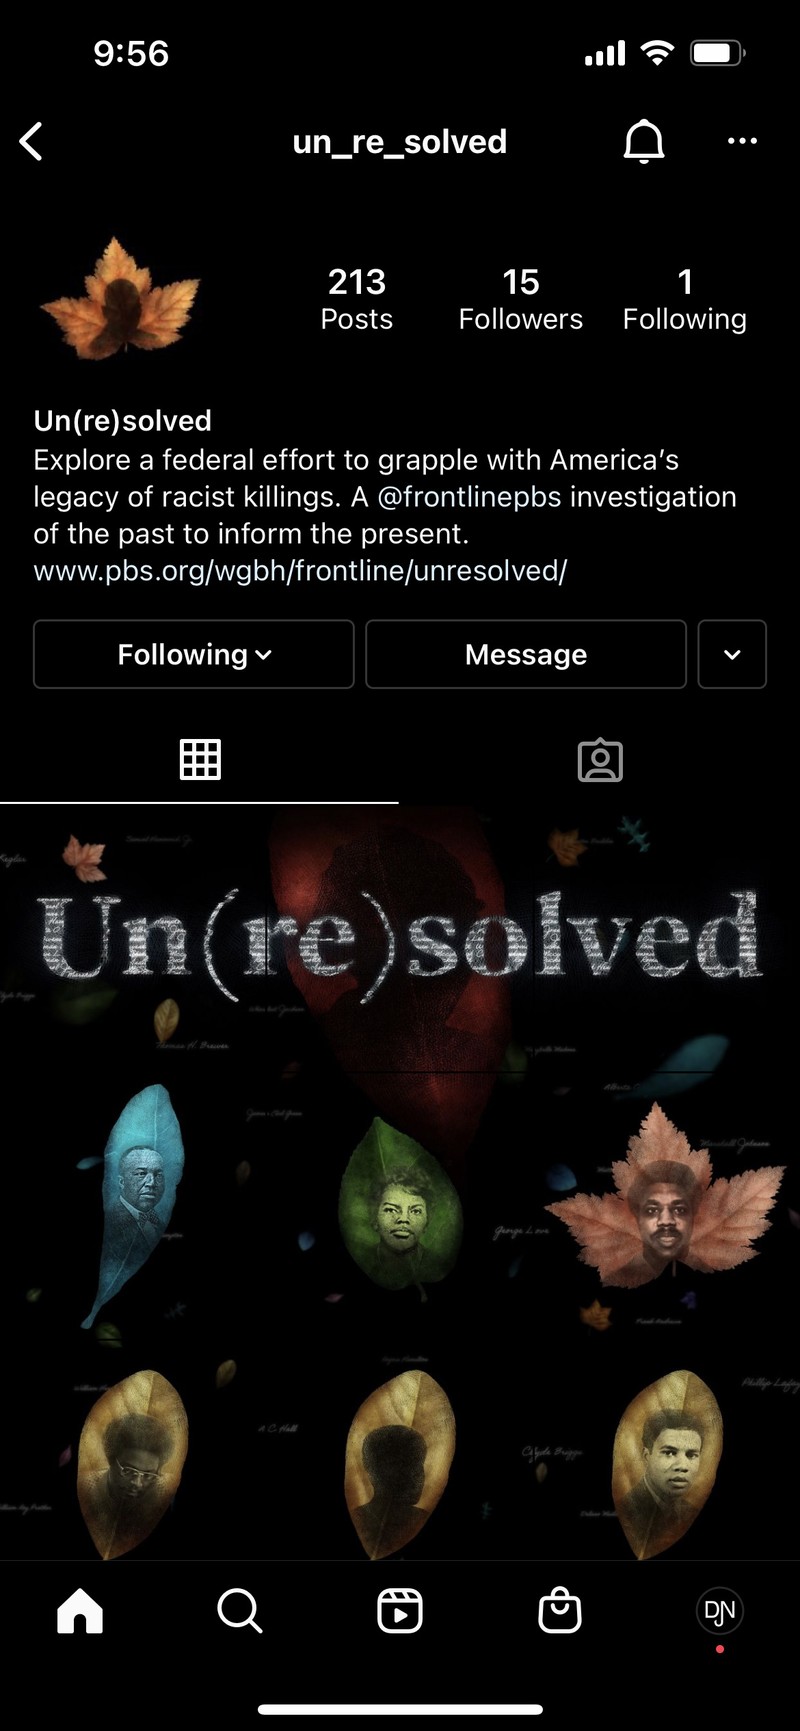 The Un(re)solved Instagram account showing posts that display the title of the project and leaves with victim's portraits on them.